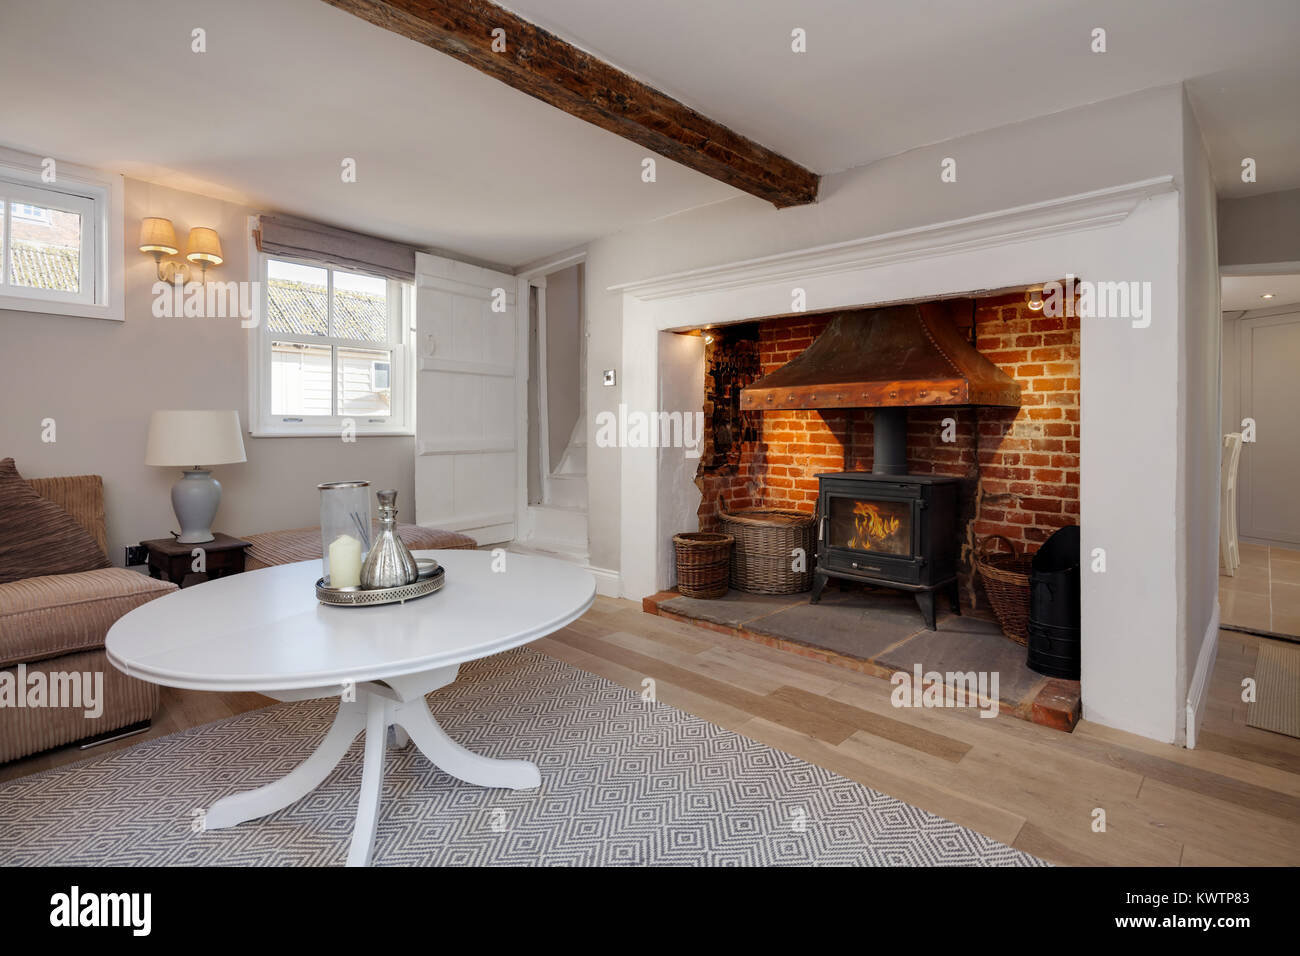 Beautiful Cottage living room with traditional redbrick fireplace containing a cast iron stove and simple surround decorated in shades of white Stock Photo